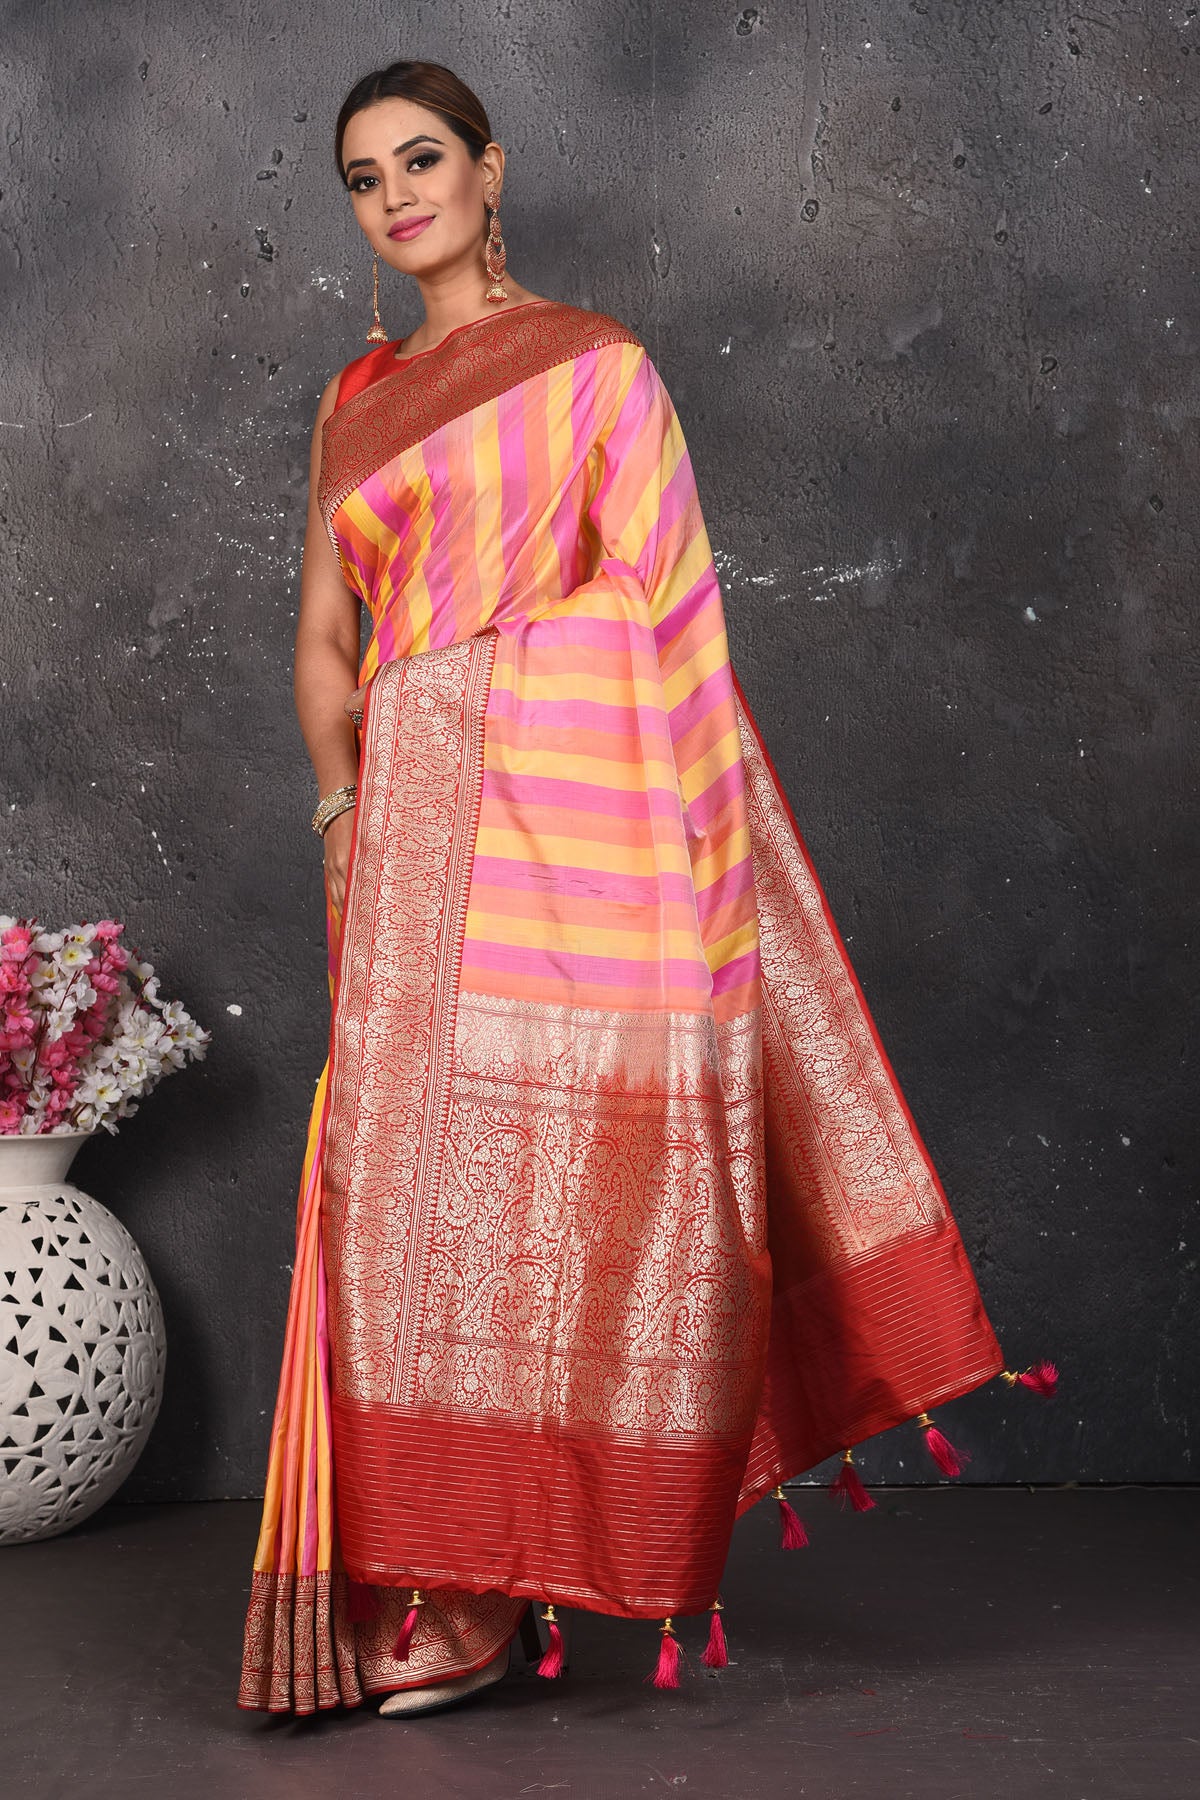 Buy this classy red banarasi silk brocade woven diagonal stripes and floral saree online in USA which has beautiful zari work all over the heavy border and end with handmade latkan. Pair this royal banarasi handloom brocade woven saree with your designer blouse and a potli bag from Pure Elegance Indian fashion store in USA.- Full view with open pallu.